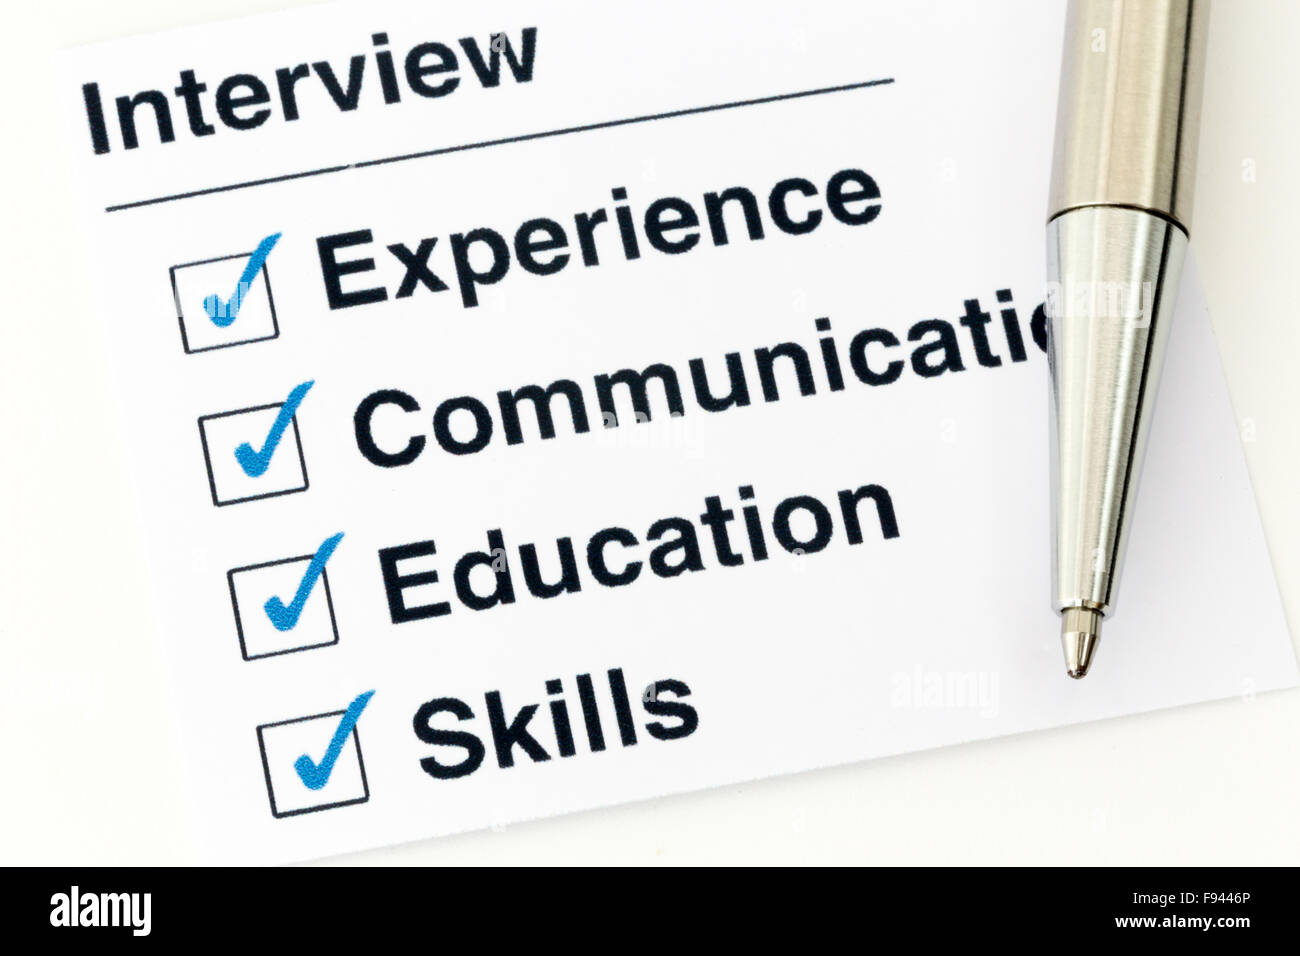 Job interview checklist with requirements Stock Photo - Alamy